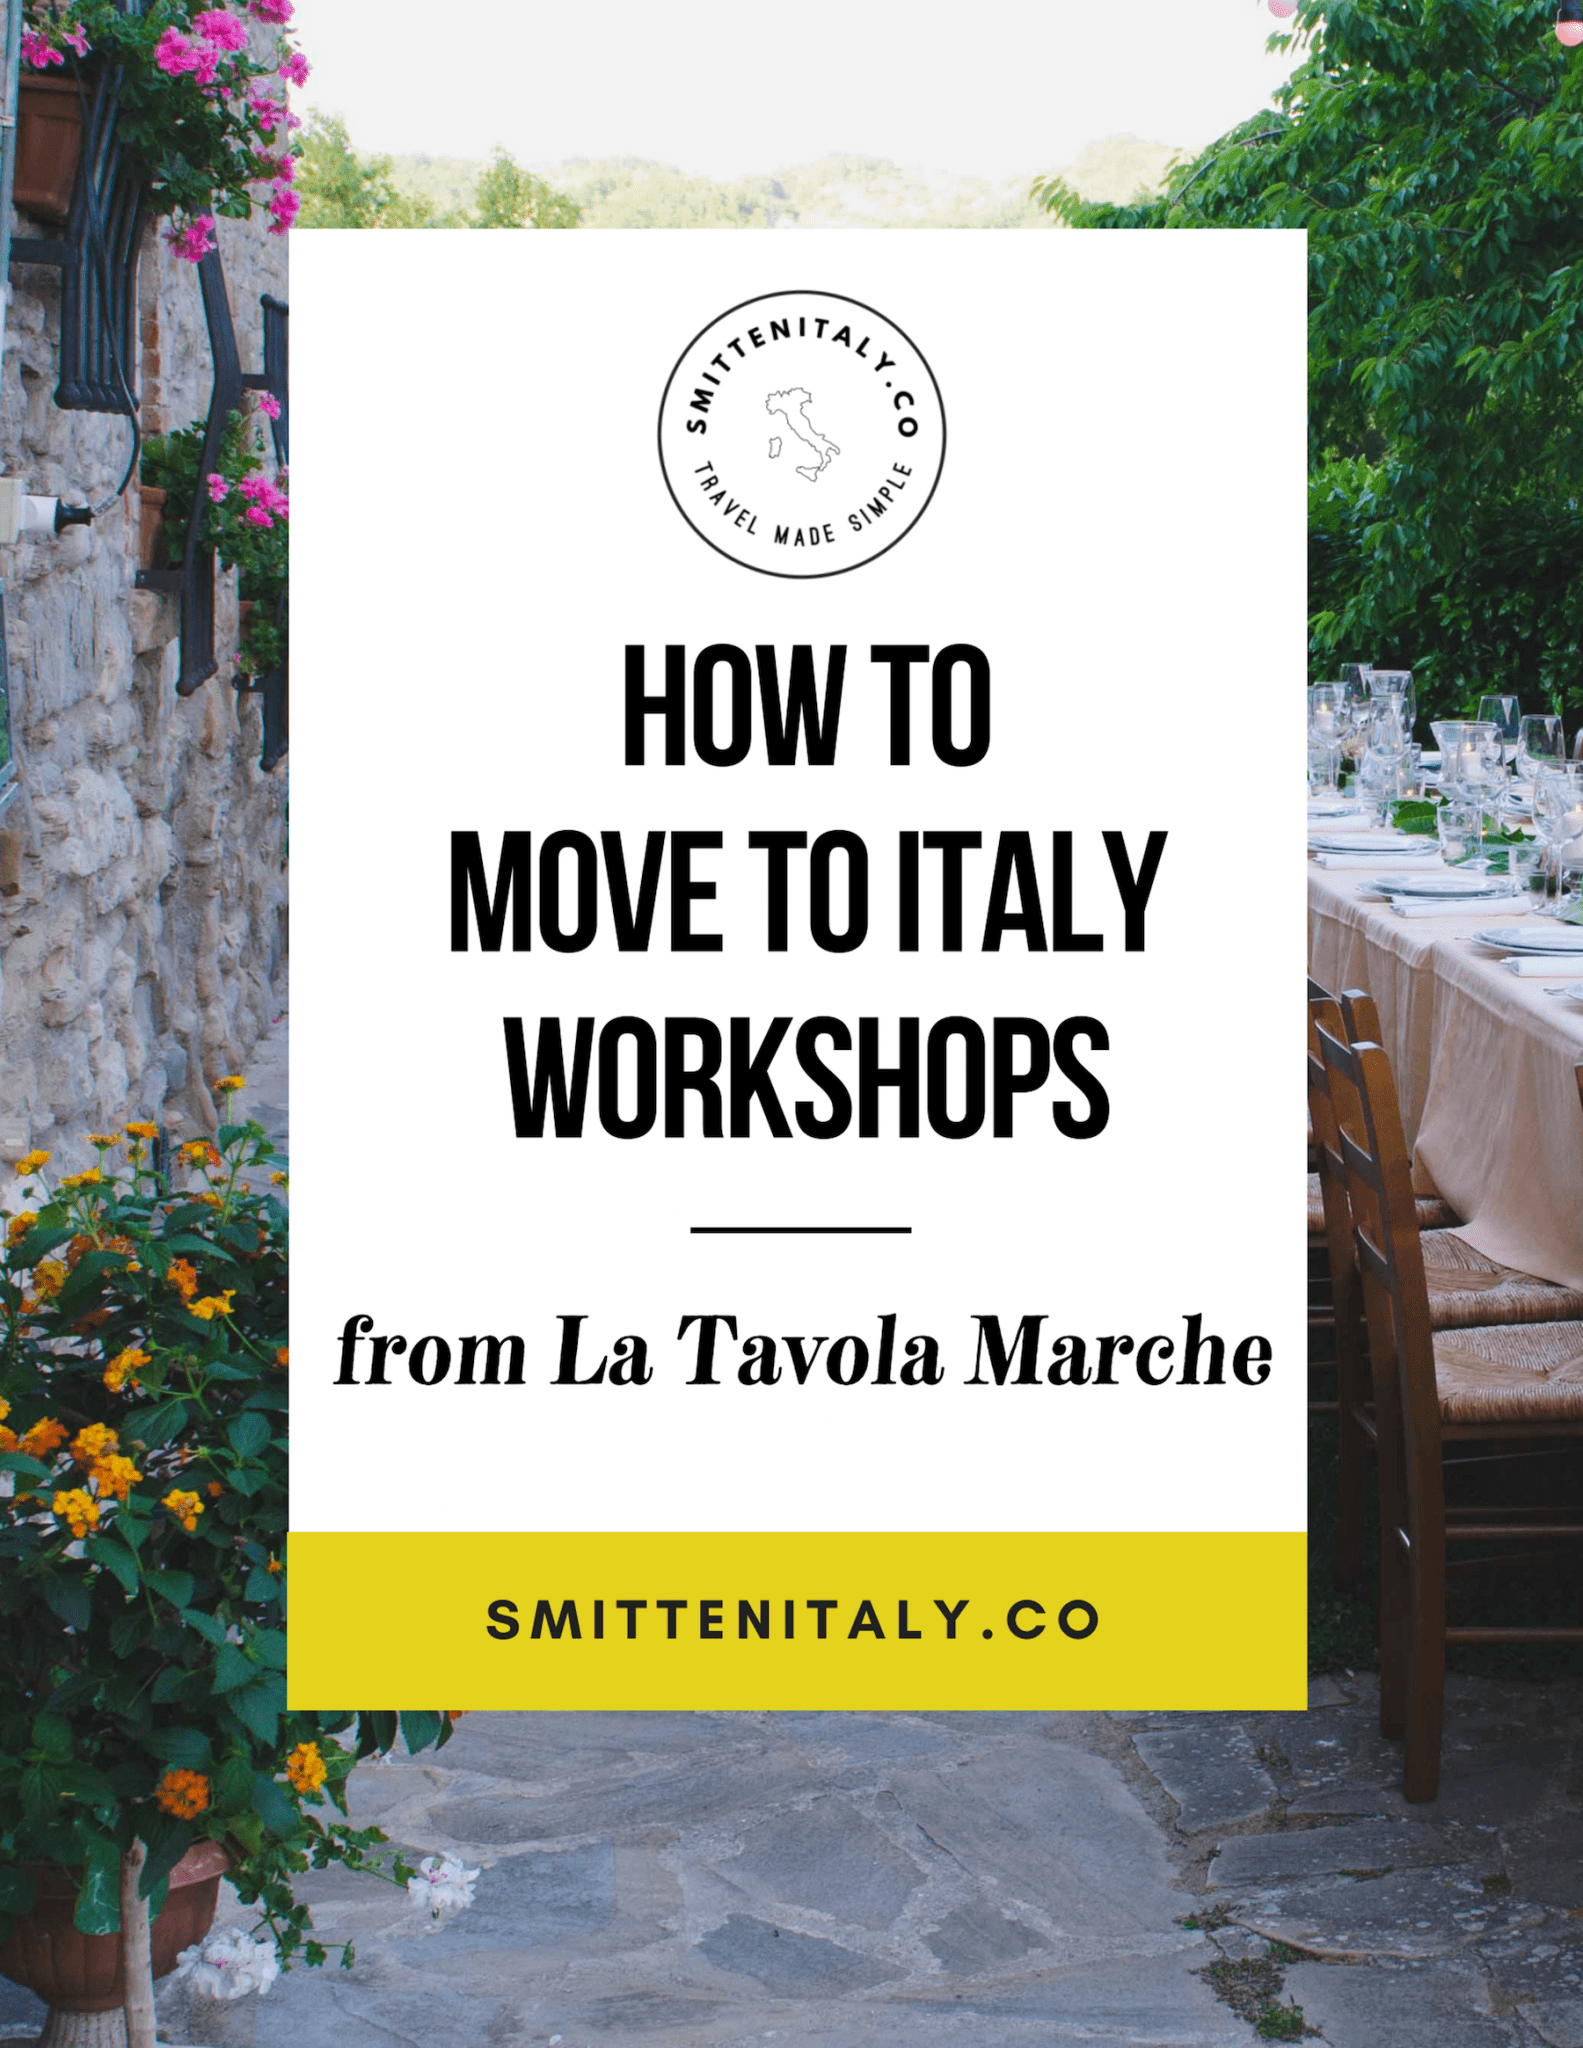 How to Move to Italy Workshops with La Tavola Marche